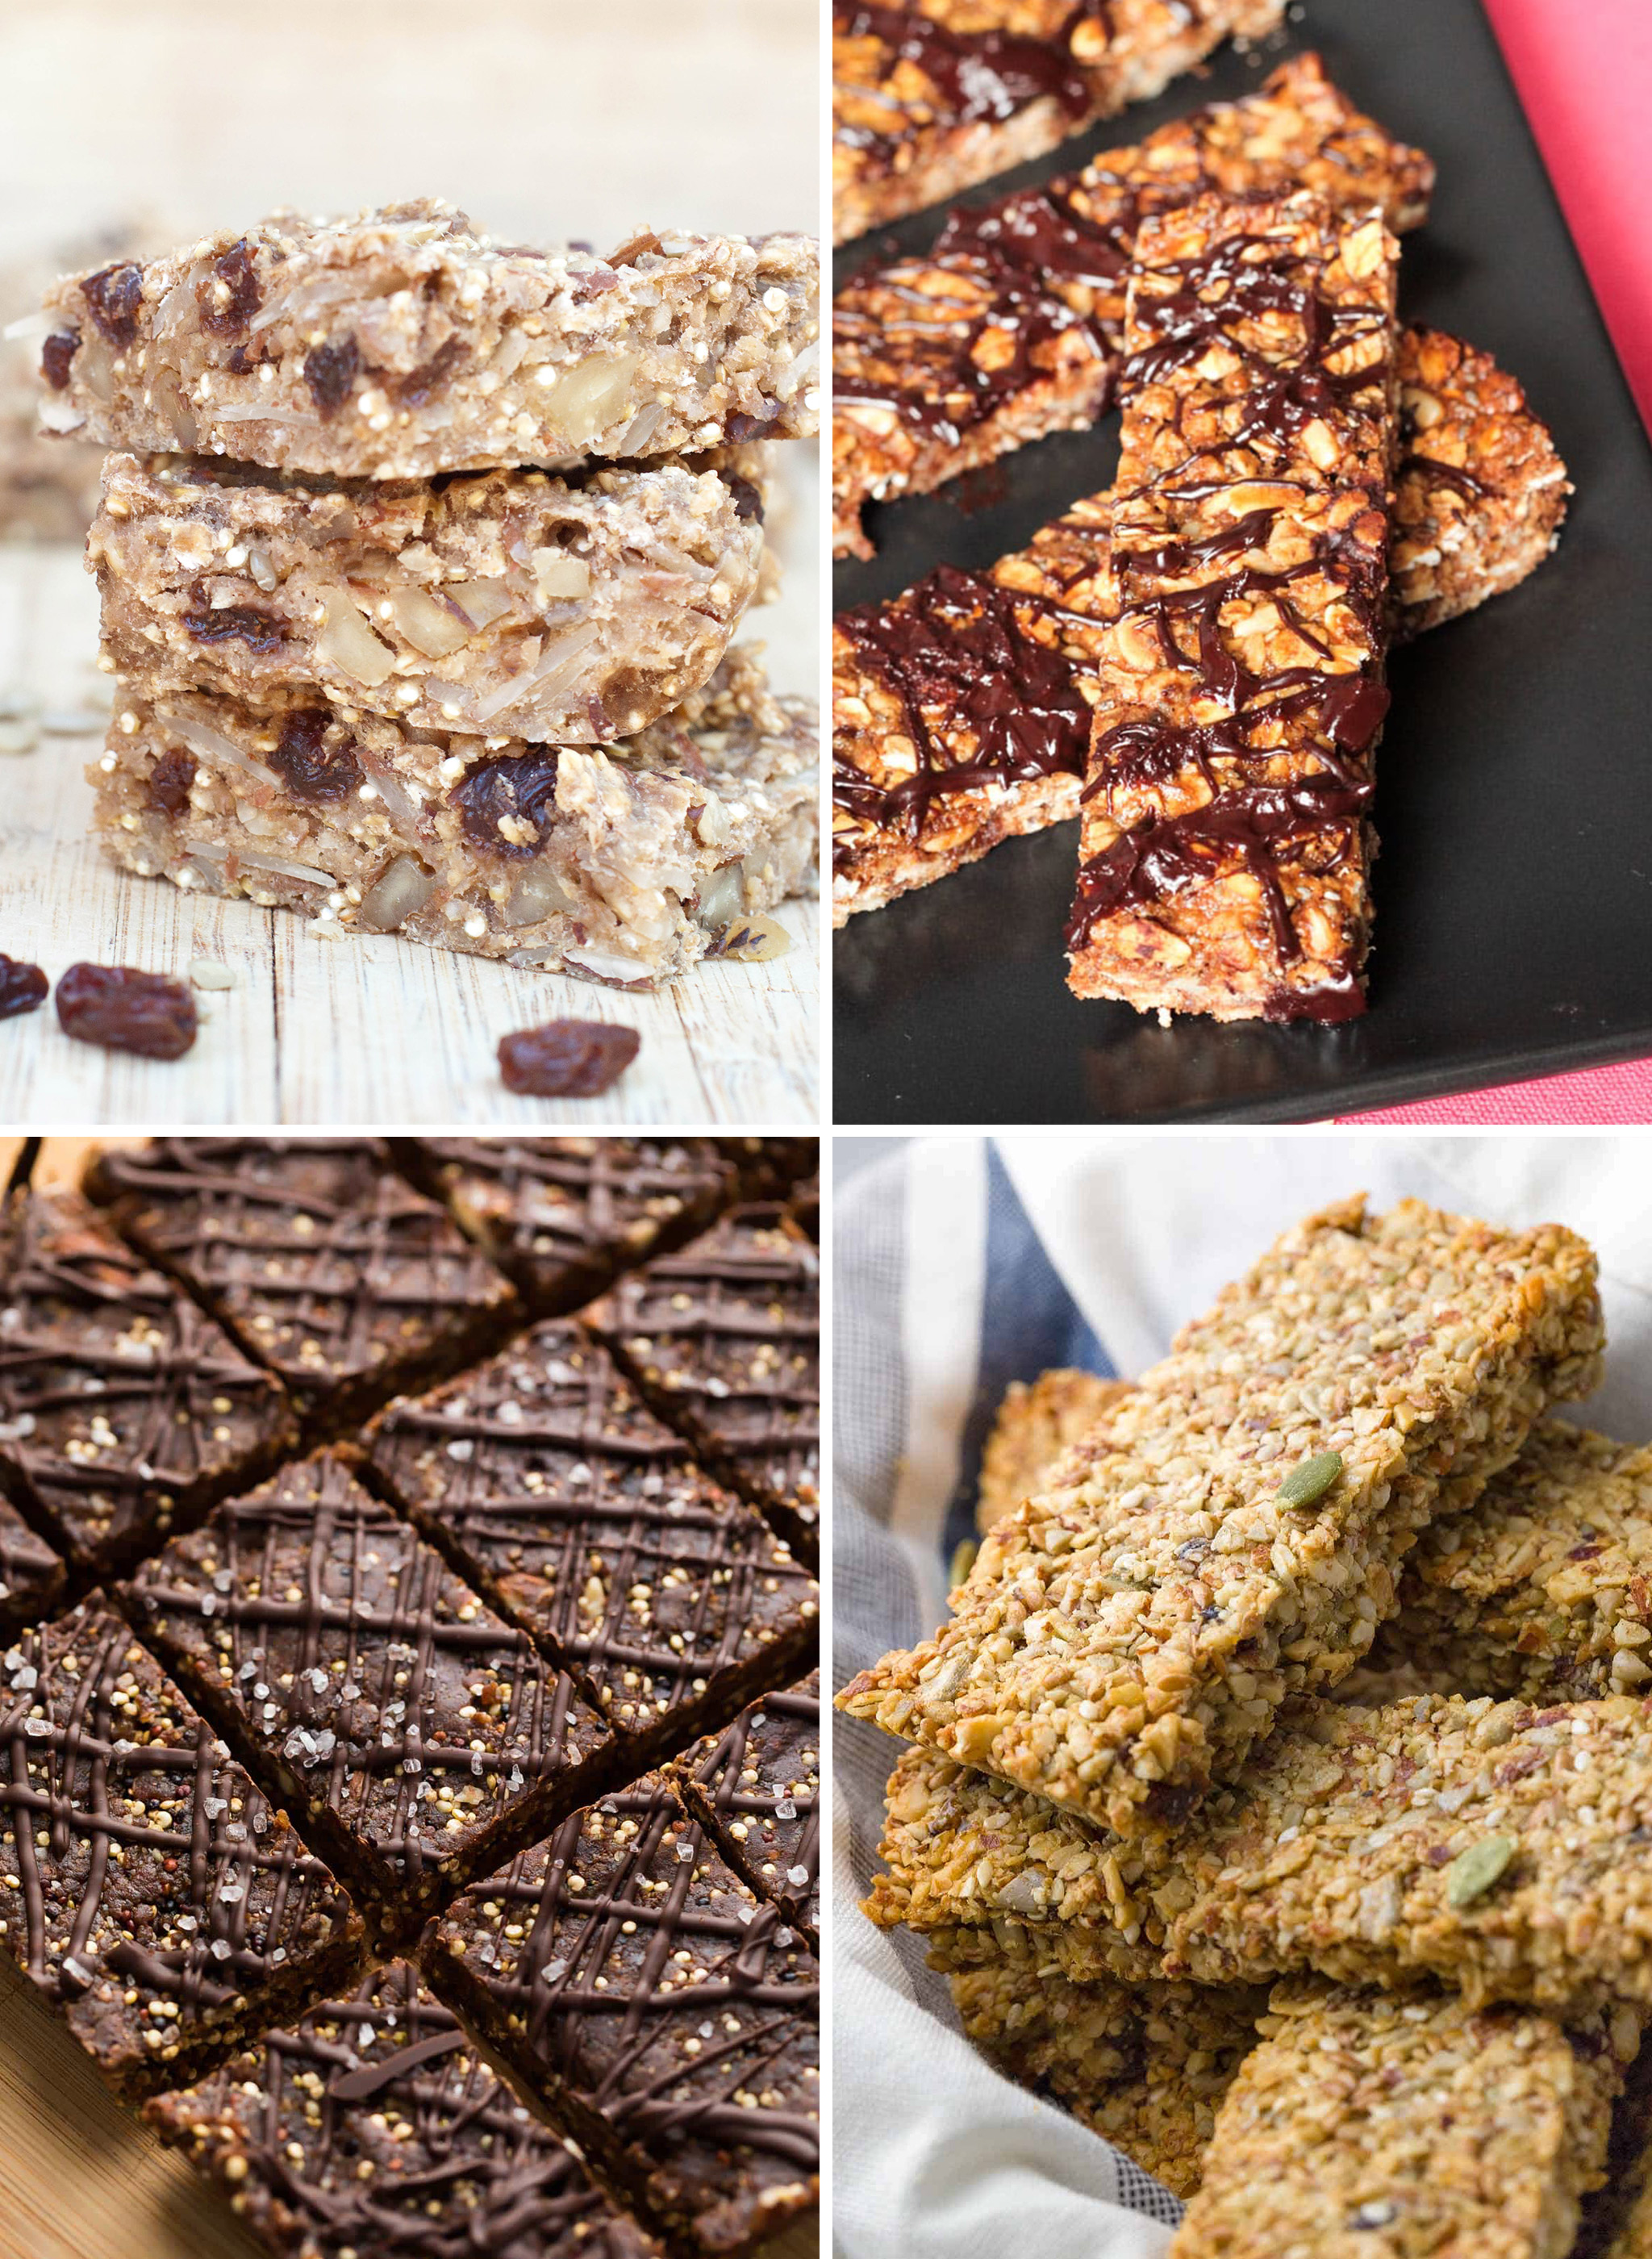 4 kinds of baked healthy snack bars you can meal prep